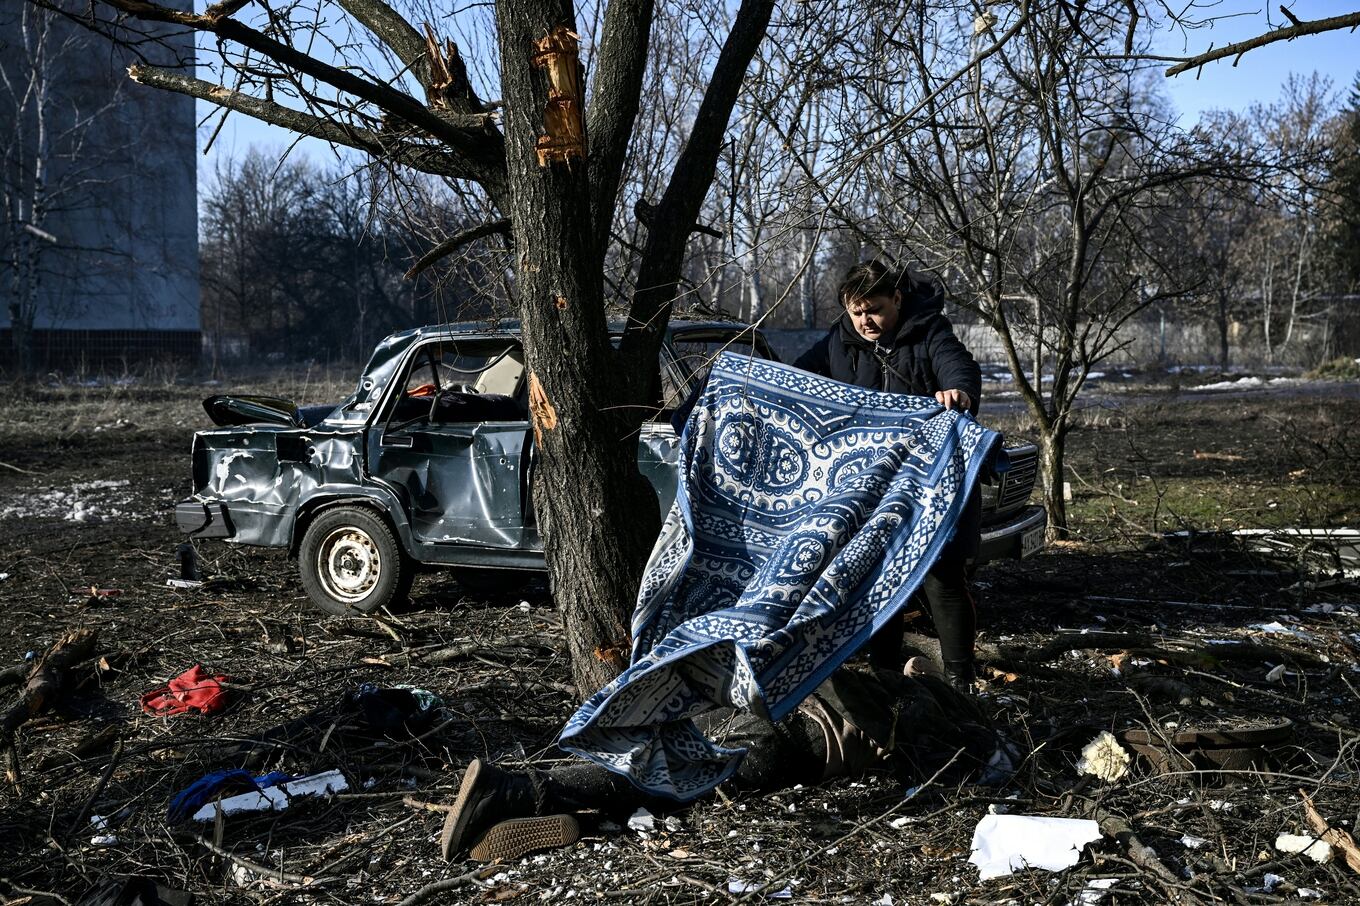 EDITORS NOTE: Graphic content / A man uses a carpet to cover a body stretched out on the ground after bombings on the eastern Ukraine town of Chuguiv on February 24, 2022, as Russian armed forces are trying to invade Ukraine from several directions, using rocket systems and helicopters to attack Ukrainian position in the south, the border guard service said. - Russia's ground forces on Thursday crossed into Ukraine from several directions, Ukraine's border guard service said, hours after President Vladimir Putin announced the launch of a major offensive. Russian tanks and other heavy equipment crossed the frontier in several northern regions, as well as from the Kremlin-annexed peninsula of Crimea in the south, the agency said. (Photo by Aris Messinis / AFP)